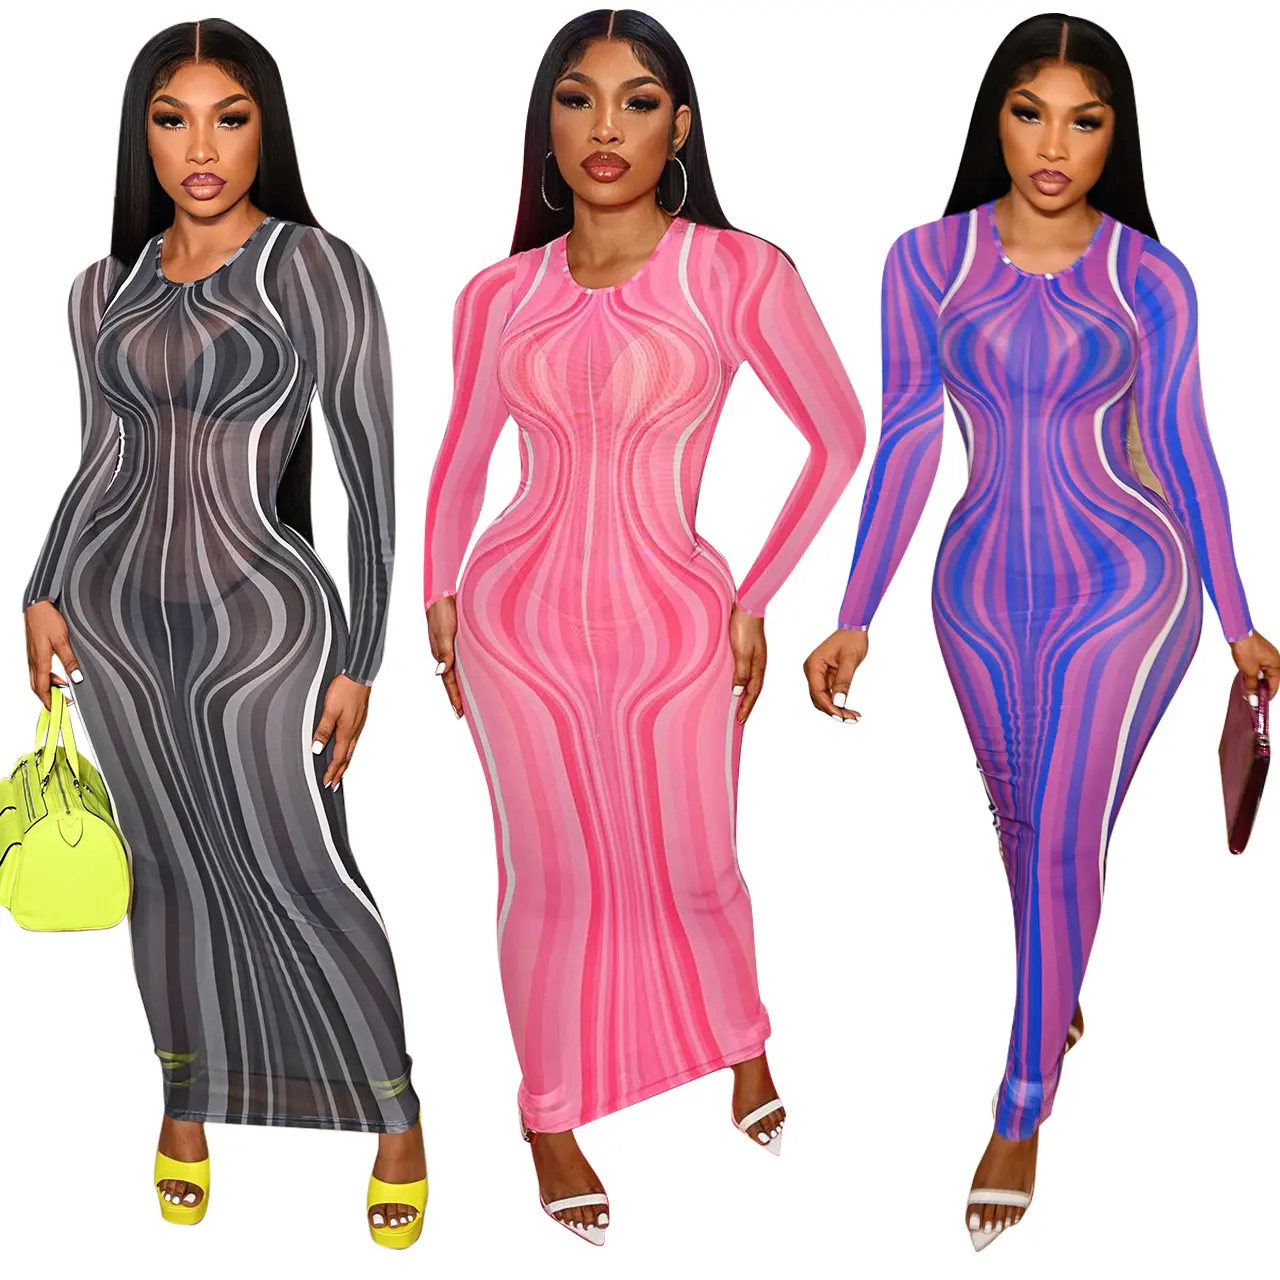 Wholesale Printed Women Dress Maxi Clothes Sheer Dress Long Sleeves Bodycon Stretch Mesh Dress Sexy Transparent